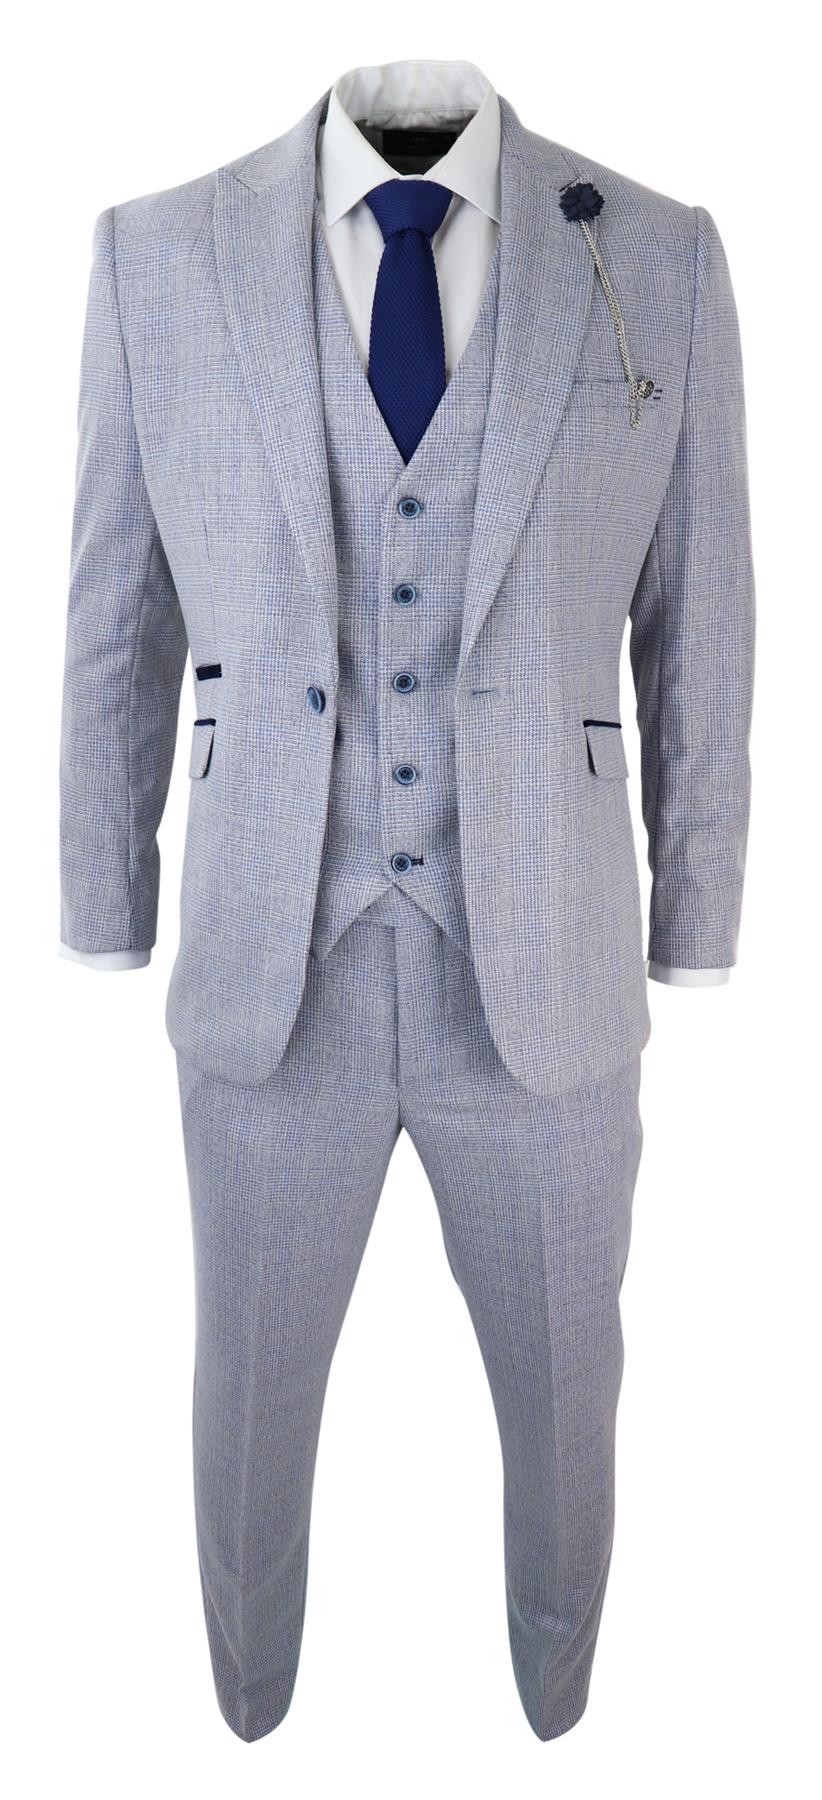 Mens 3 Piece Tweed Suit Light Blue Check Peaky Blinders 1920 Gatsby Wedding Suit - Upperclass Fashions 